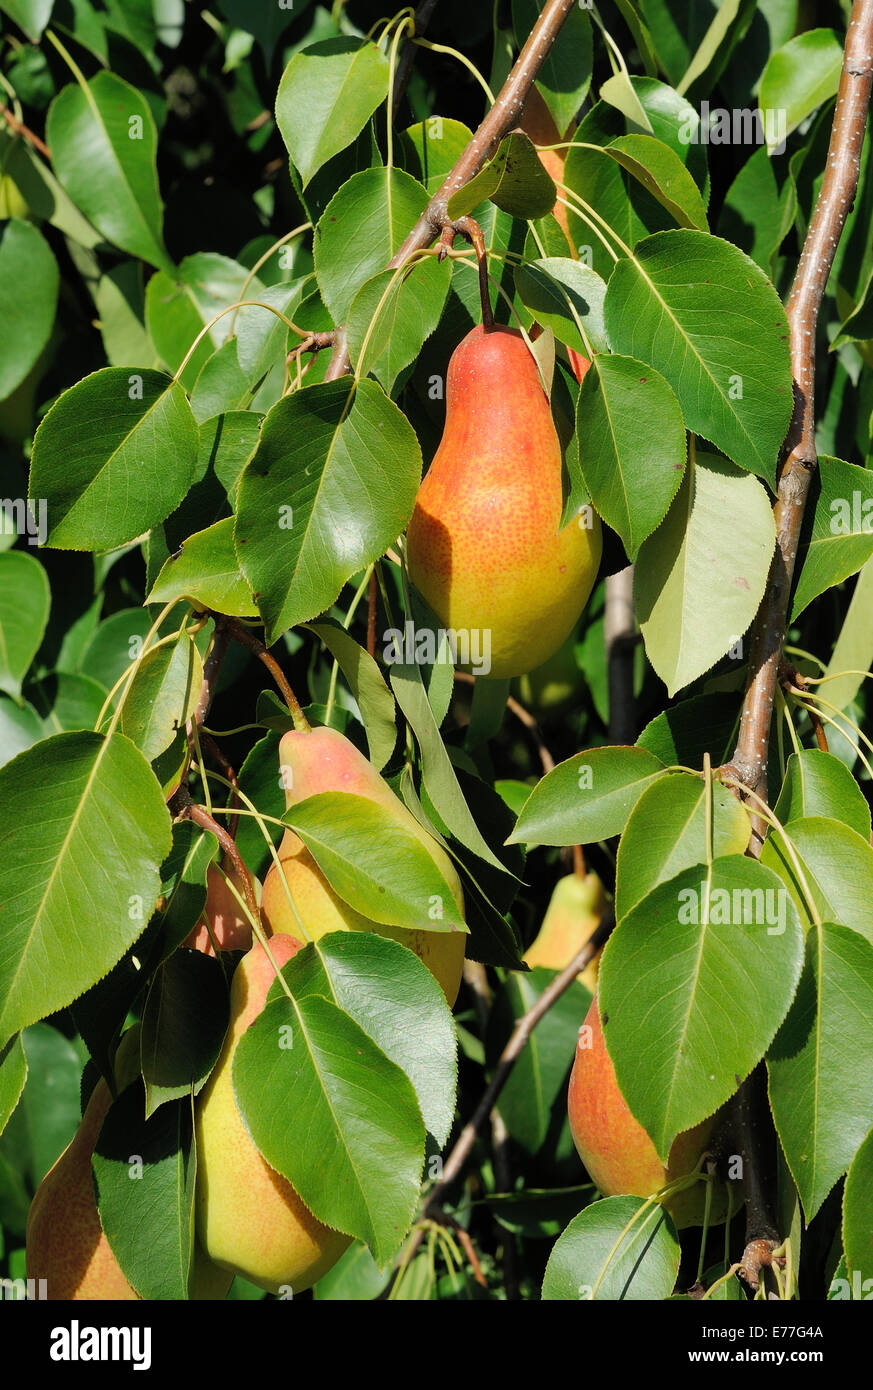 Ripe pear in leaves of the tree Stock Photo